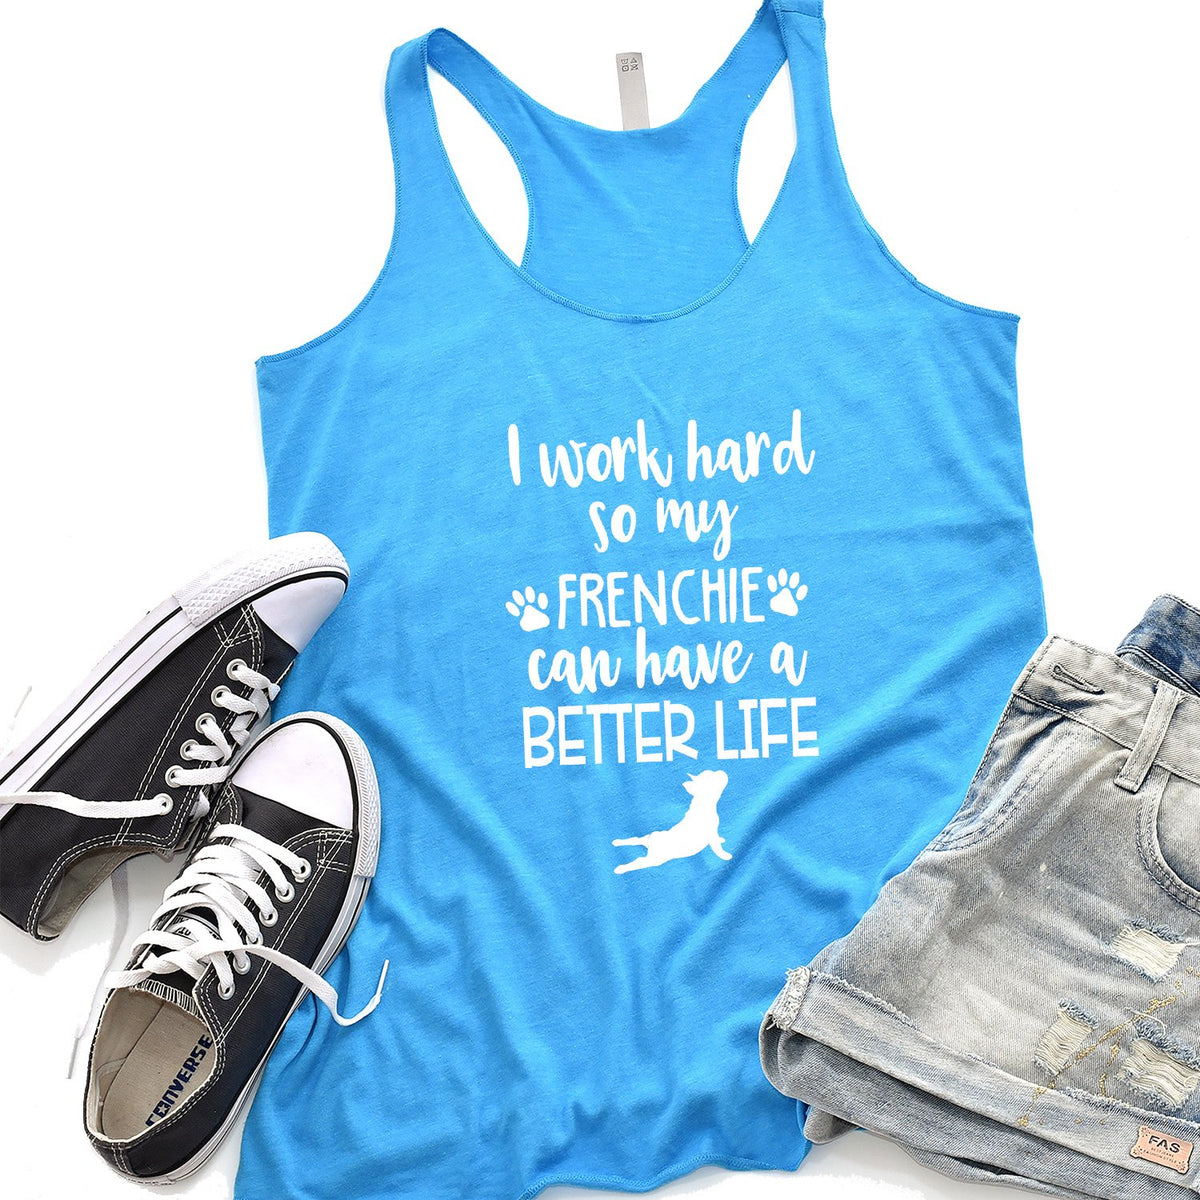 I Work Hard So My Frenchie Can Have A Better Life - Tank Top Racerback